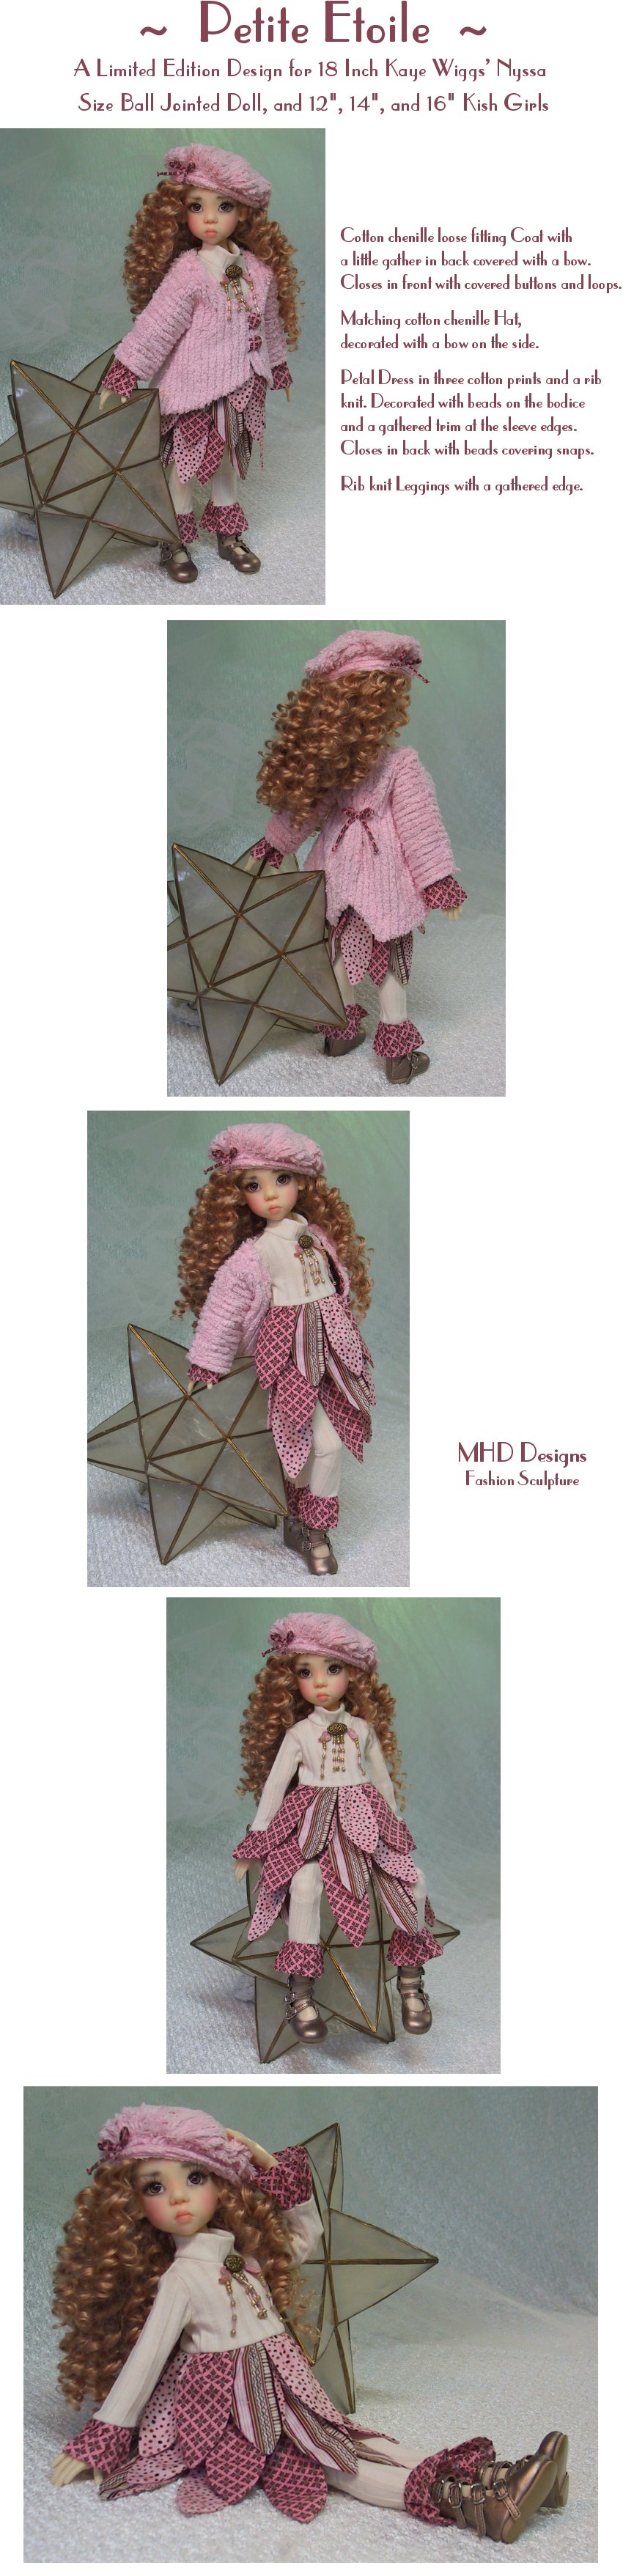 Little Star  - a Limited Edition Design by MHD Designs - High Resolution Photographs, your patience is appreciated!